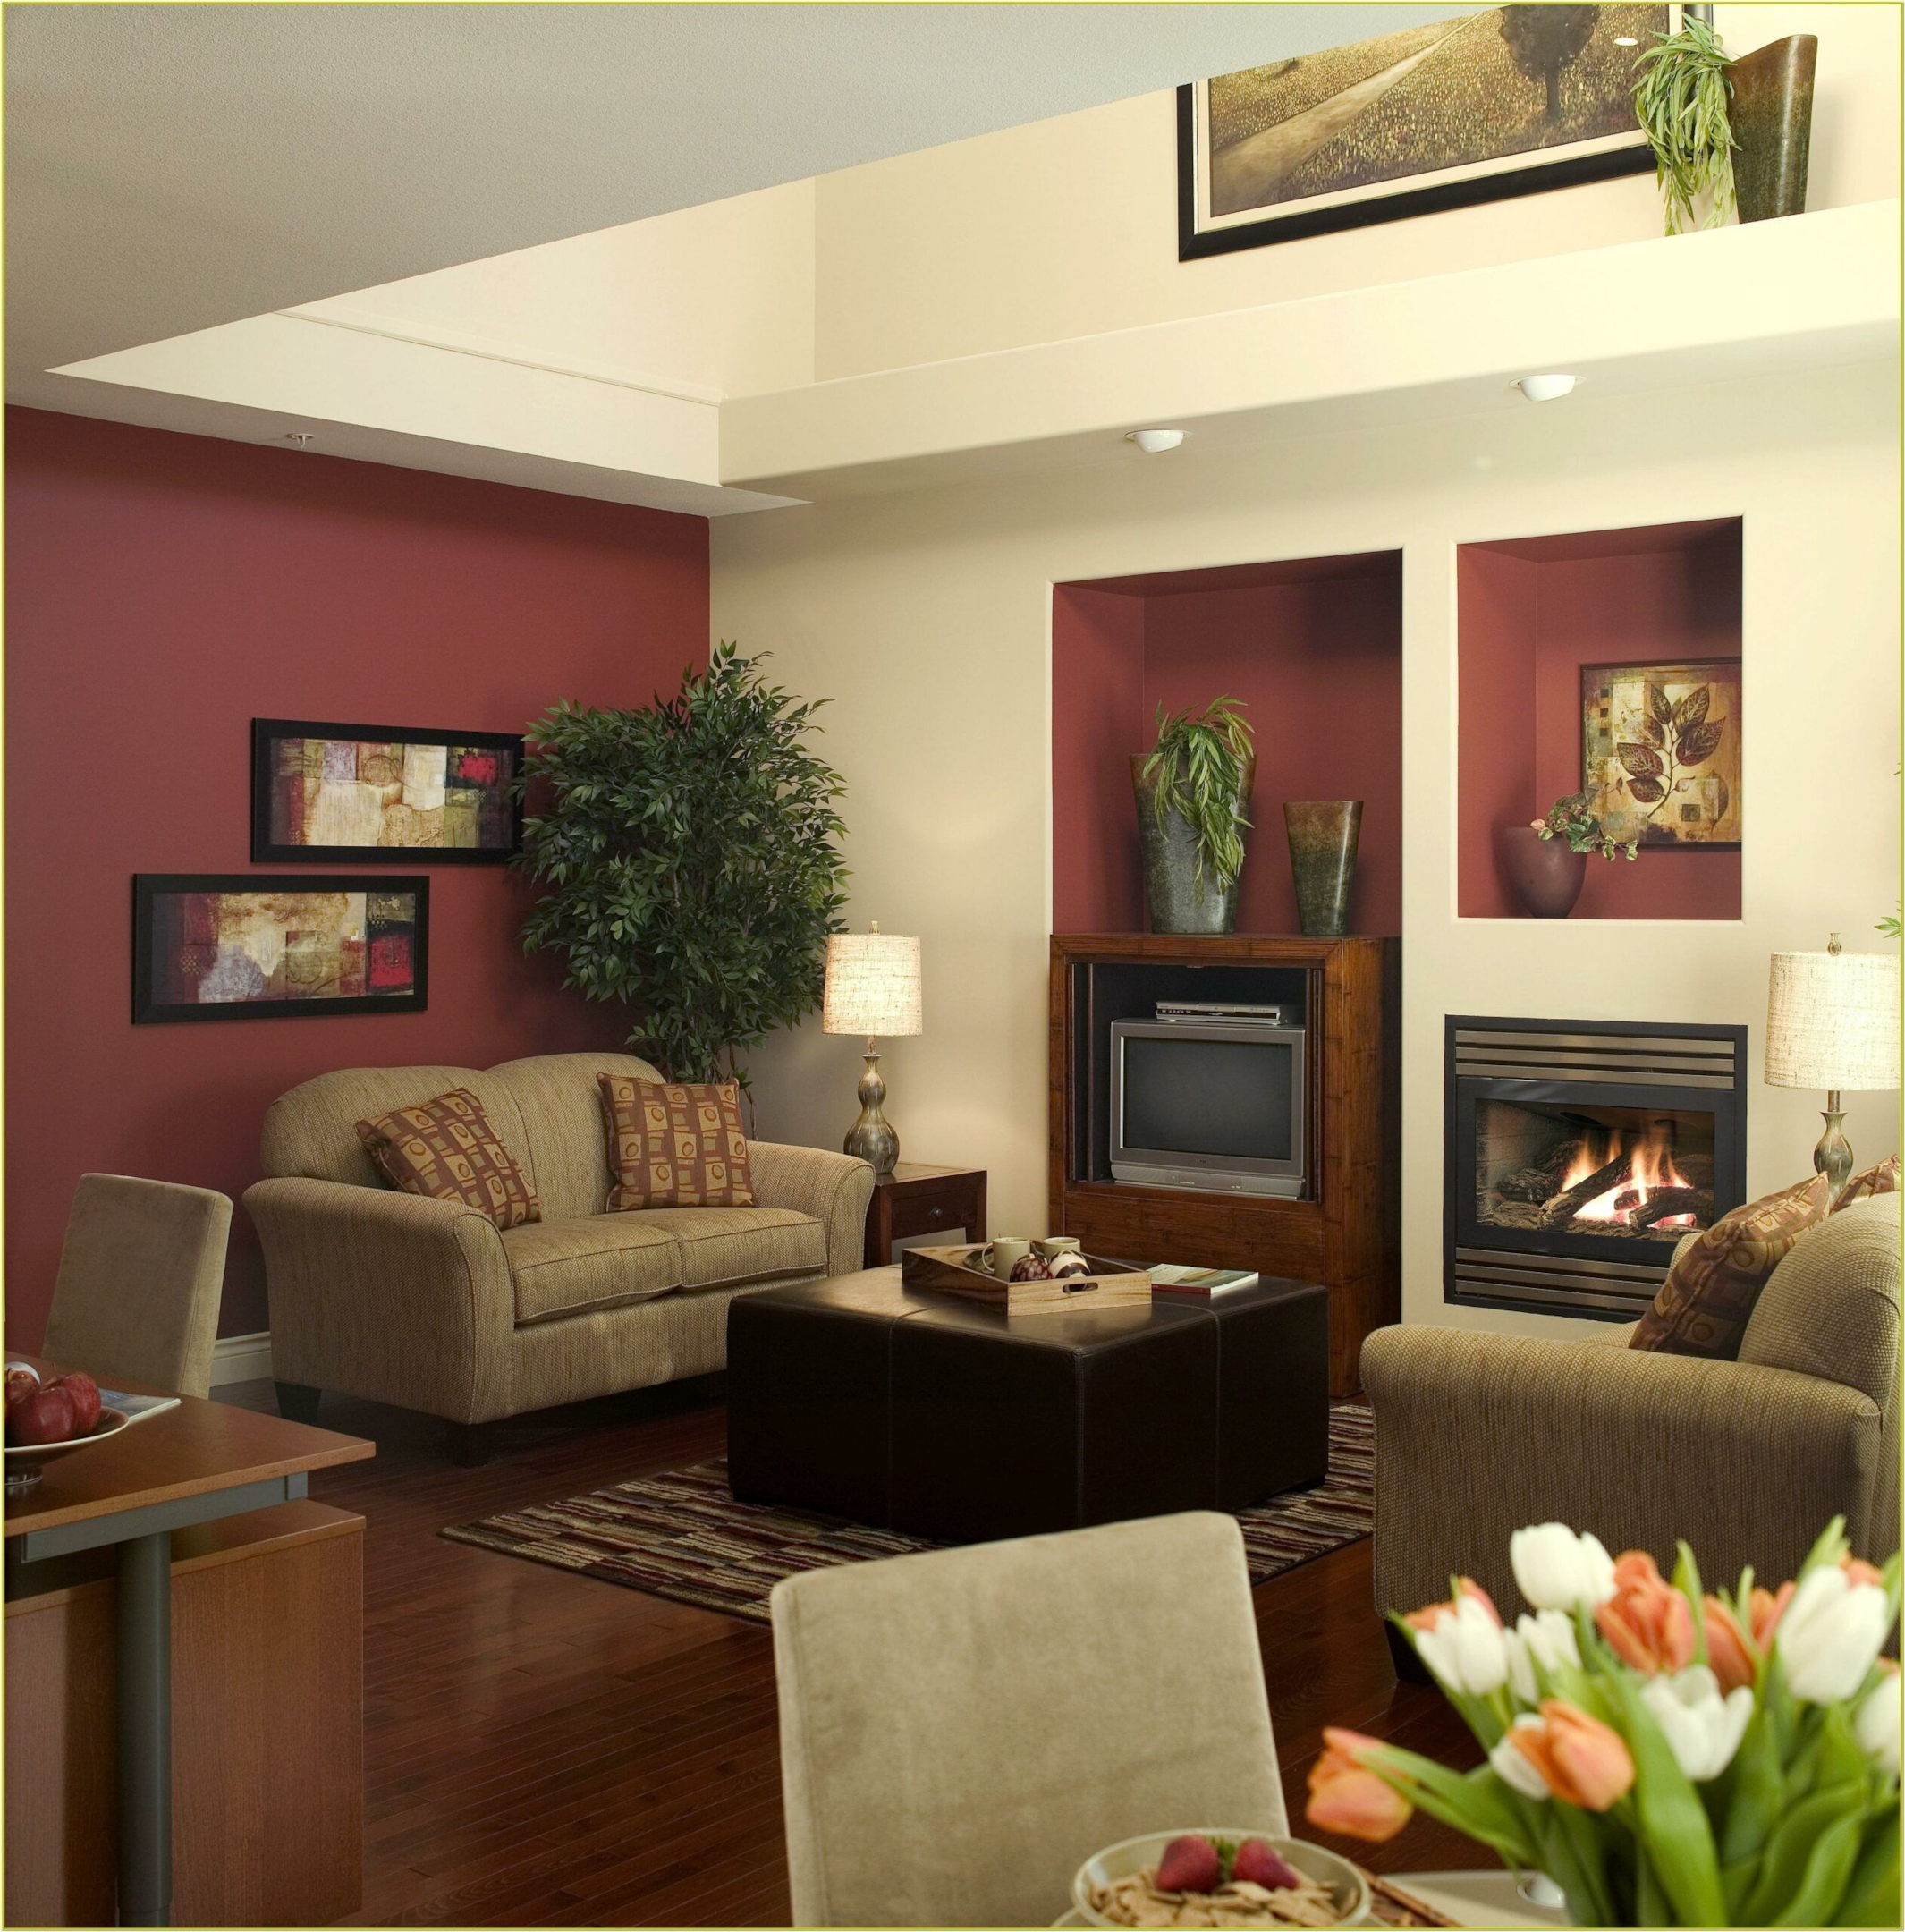 Beige walls and burgundy paint color